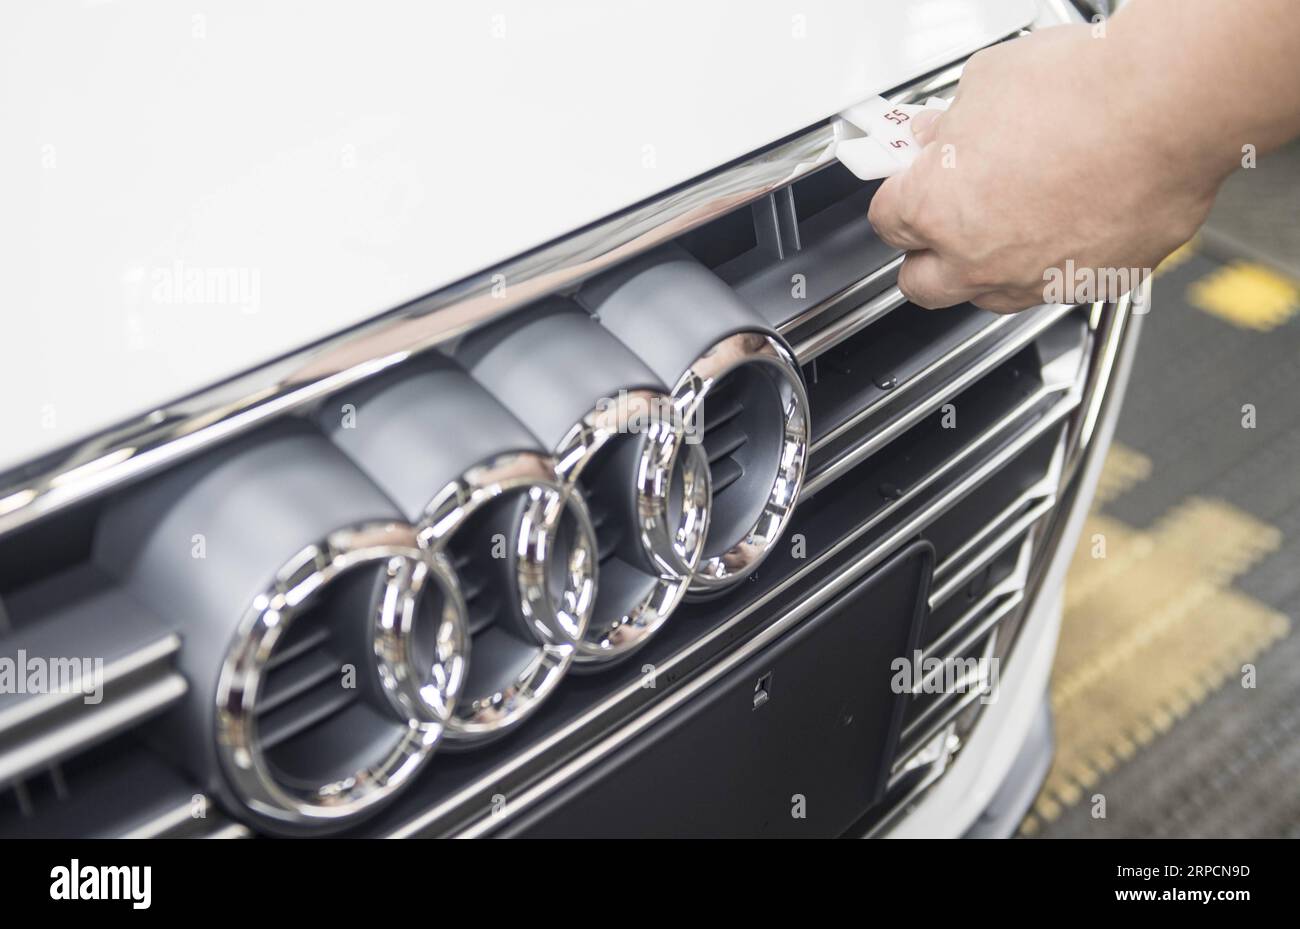 (190709) -- CHANGCHUN, July 9, 2019 -- A worker checks an Audi vehicle at FAW-Volkswagen factory in Changchun, northeast China s Jilin Province, July 9, 2019. The Sino-German auto joint venture FAW-Volkswagen said a record 311,871 Audi vehicles were sold in China in the first half of 2019, up 2.1 percent year-on-year. ) CHINA-JILIN-CHANGCHUN-AUDI-SALES RECORD XuxChang PUBLICATIONxNOTxINxCHN Stock Photo